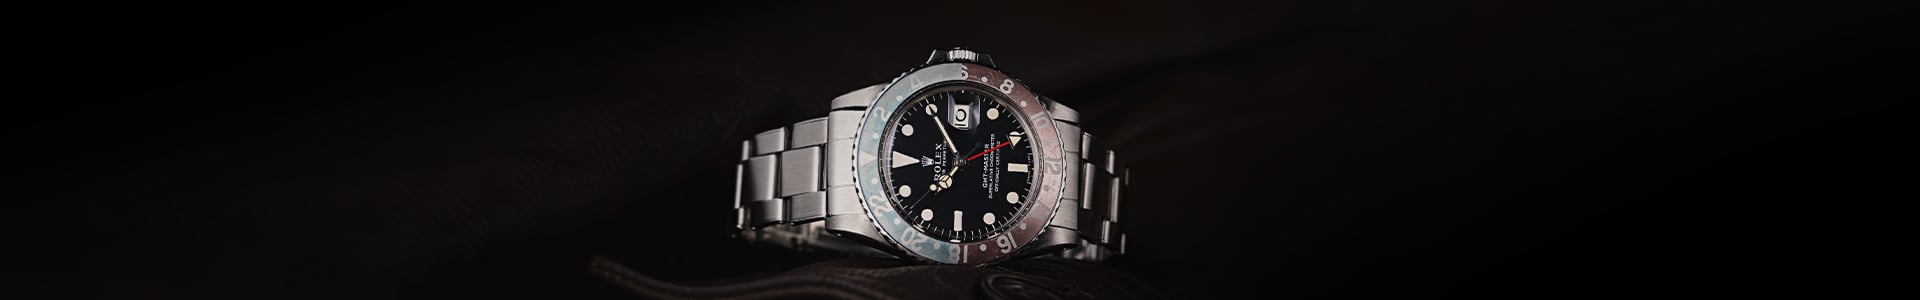 Vintage Rolex GMT Master 1675 Auction: The Apollo 14 Ocean Recovery